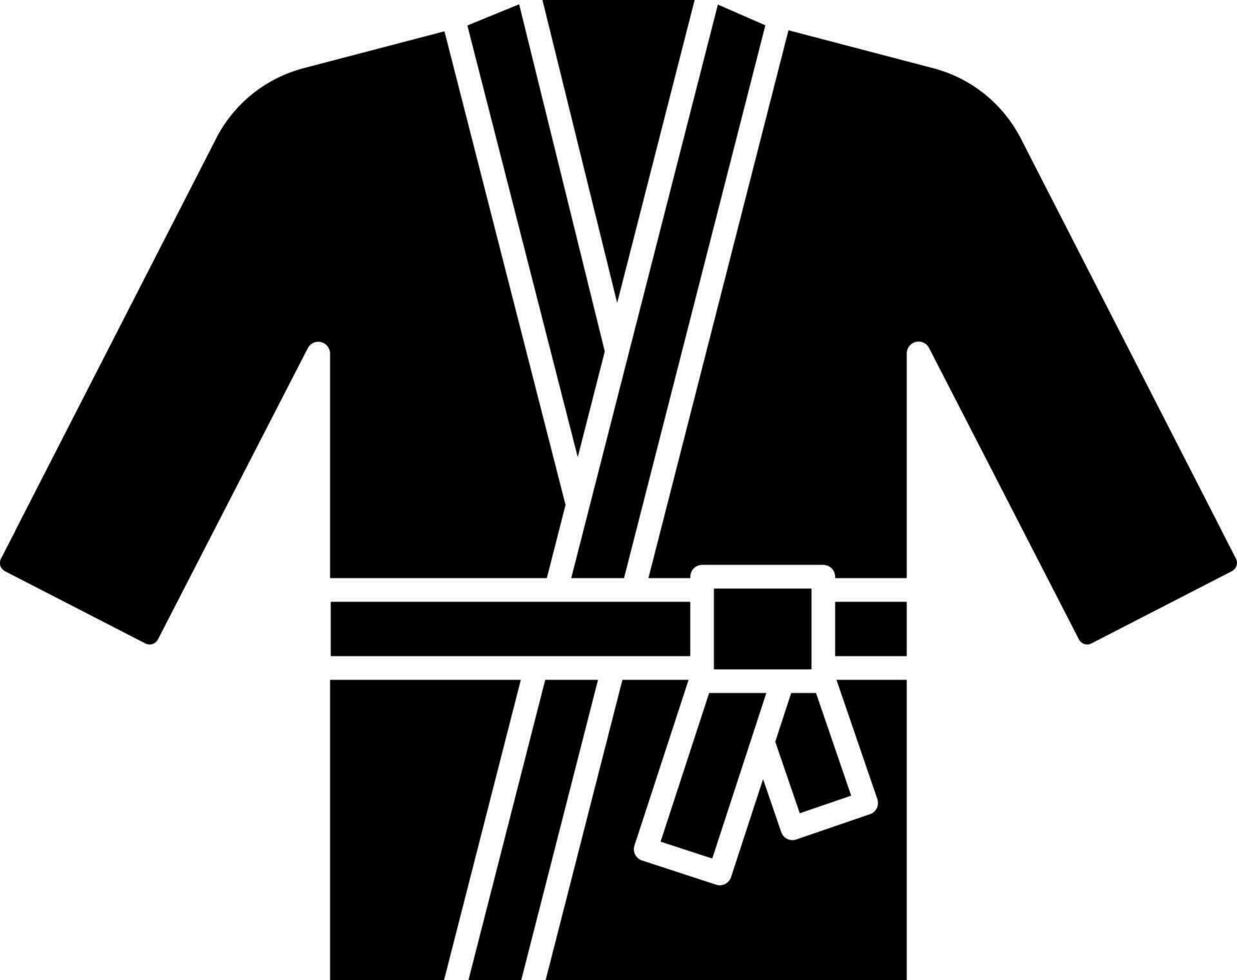 Black and White judo costume icon in flat style. vector